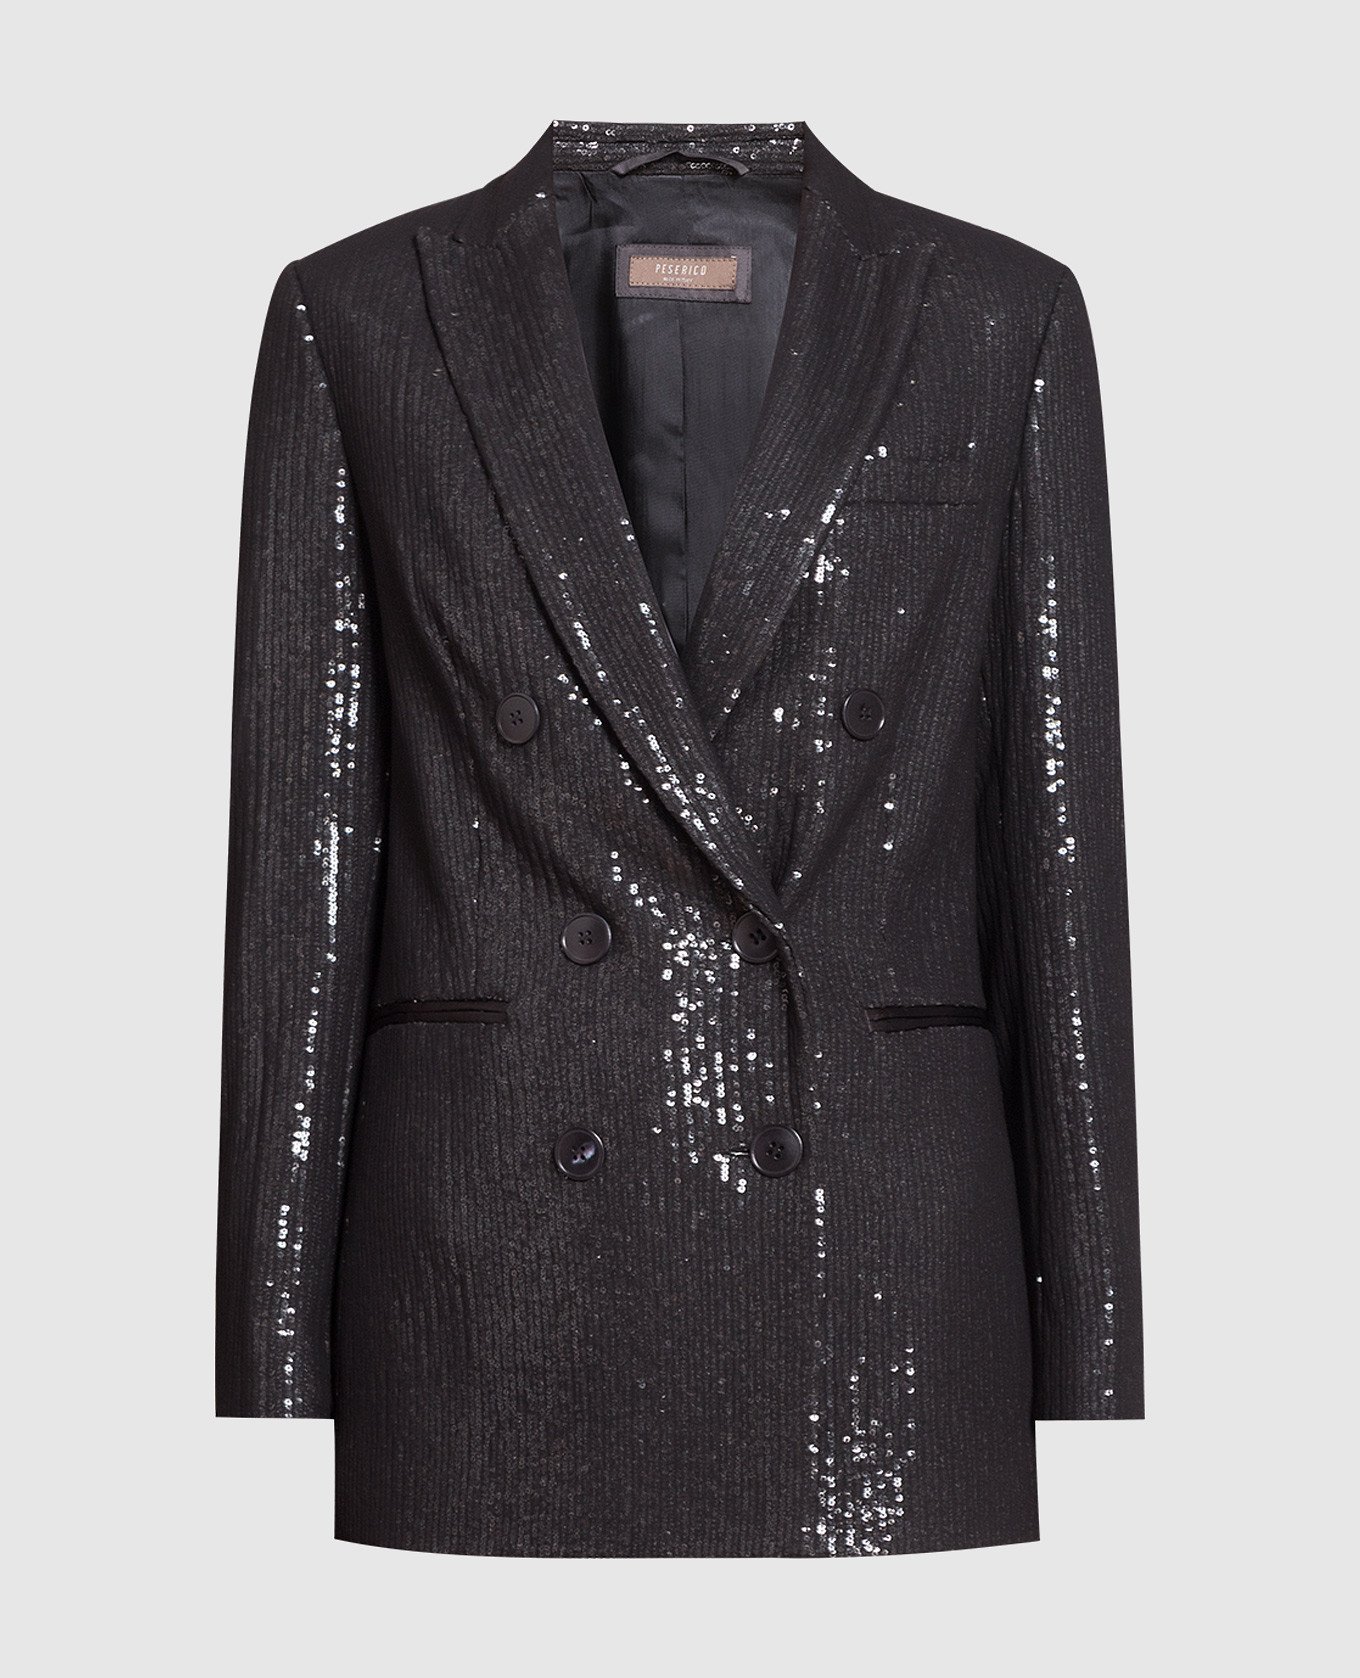 Black double-breasted jacket with sequins